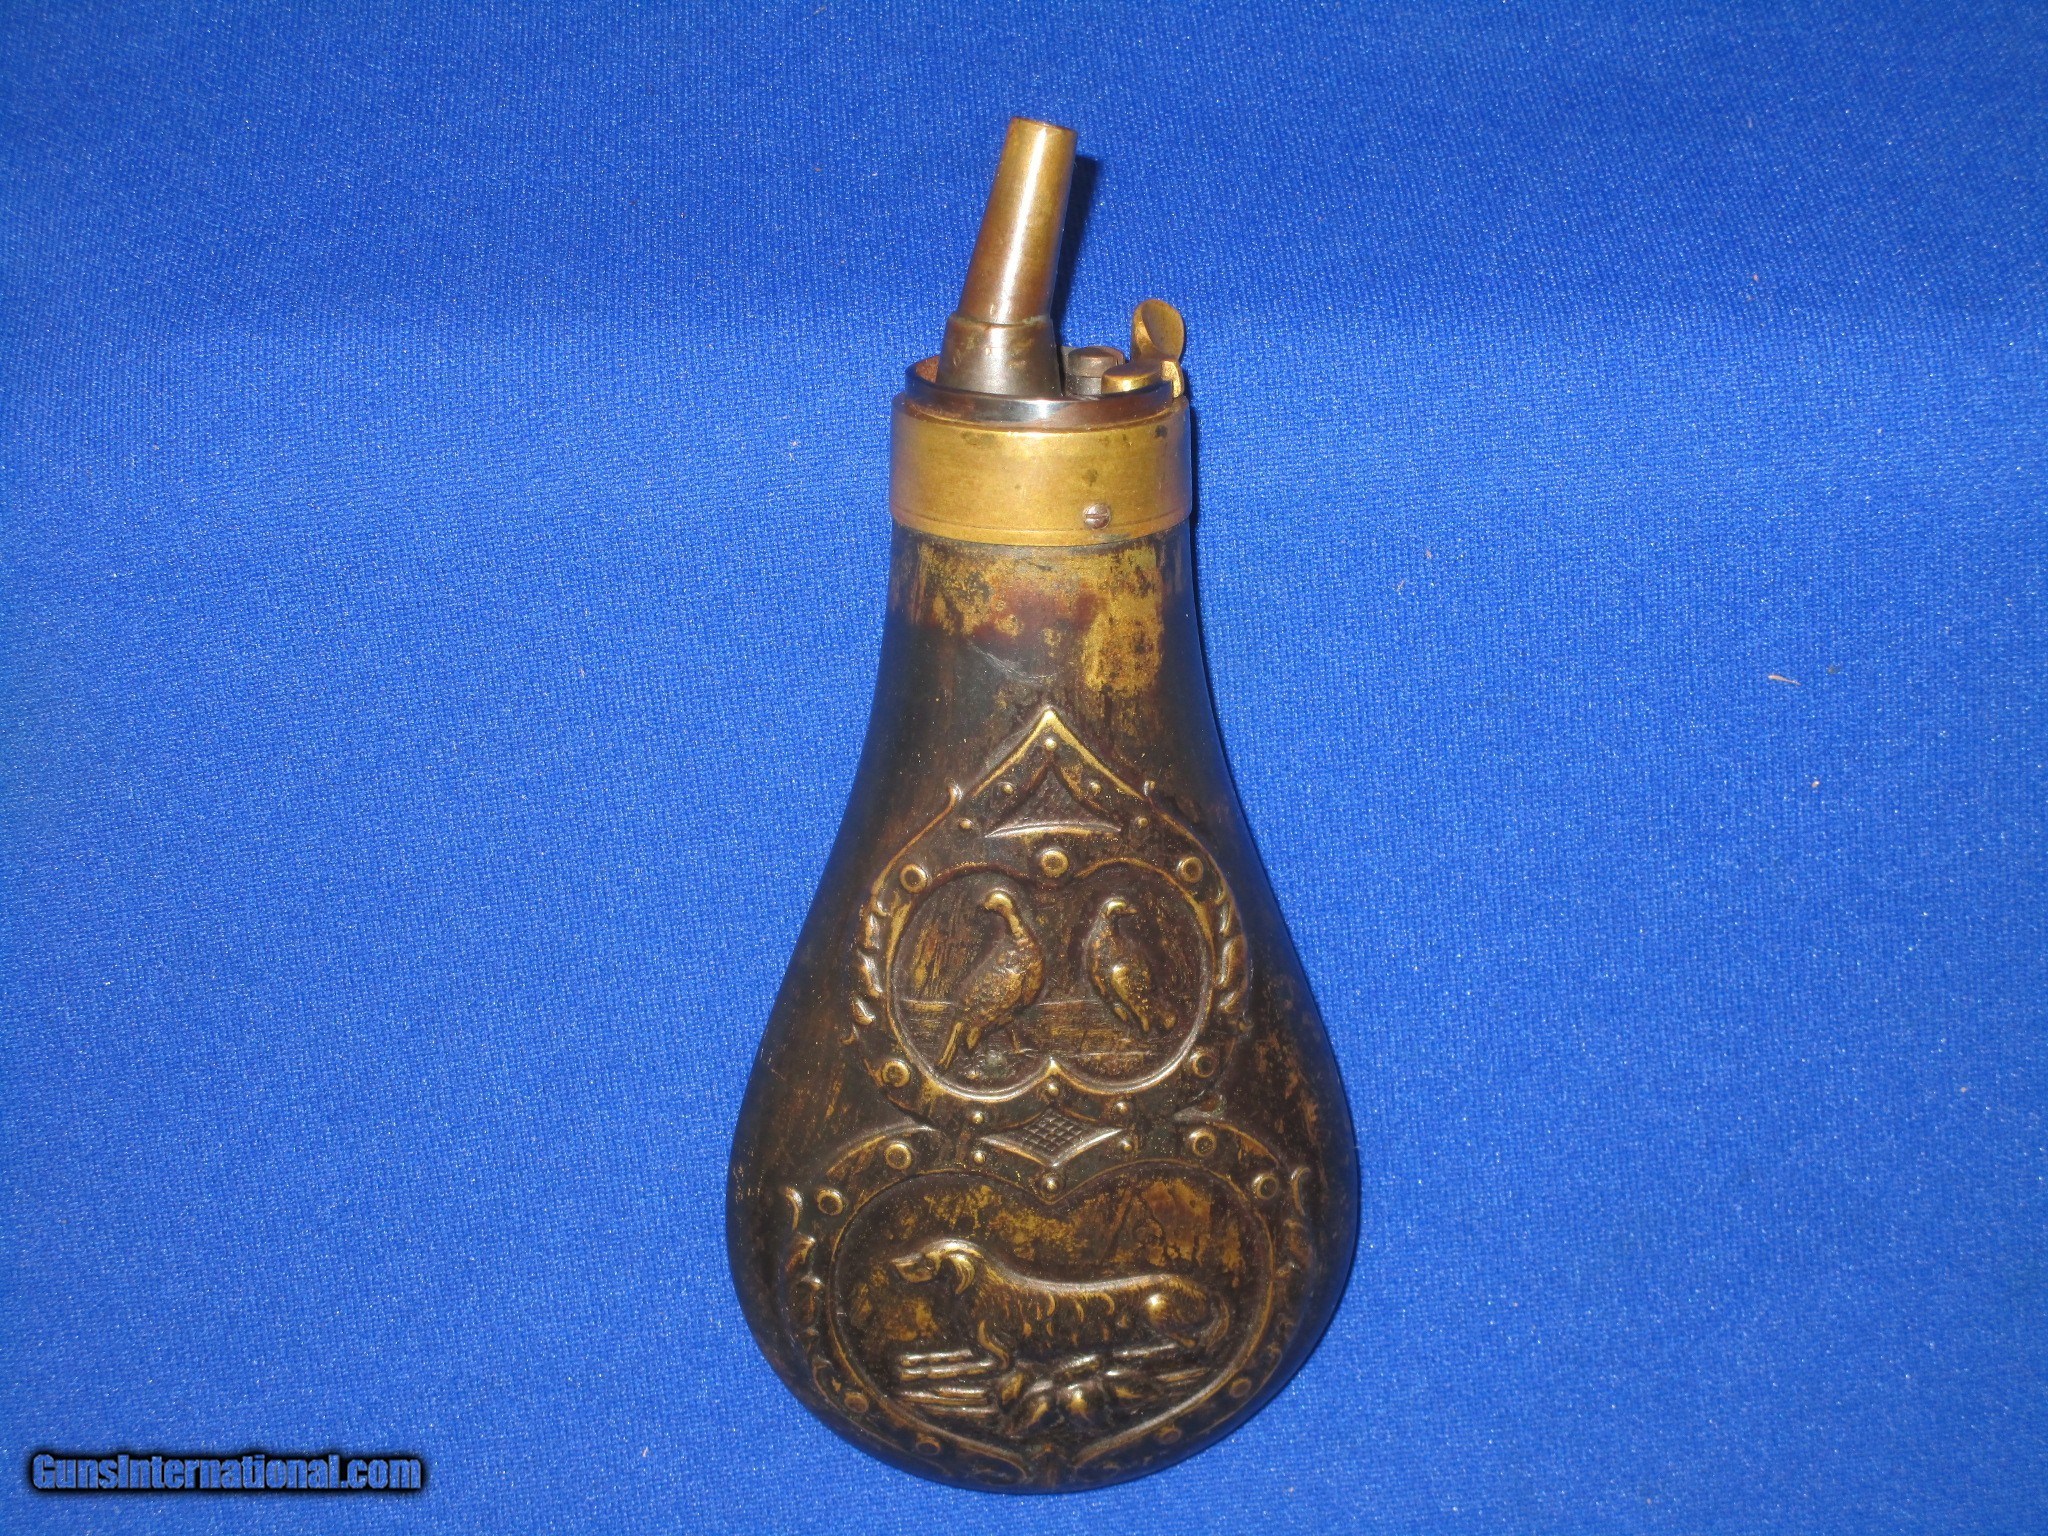 A CIVIL WAR REMINGTON PERCUSSION ARMY OR NAVY REVOLVER POWDER FLASK IN VERY  GOOD UNTOUCHED CONDITION!